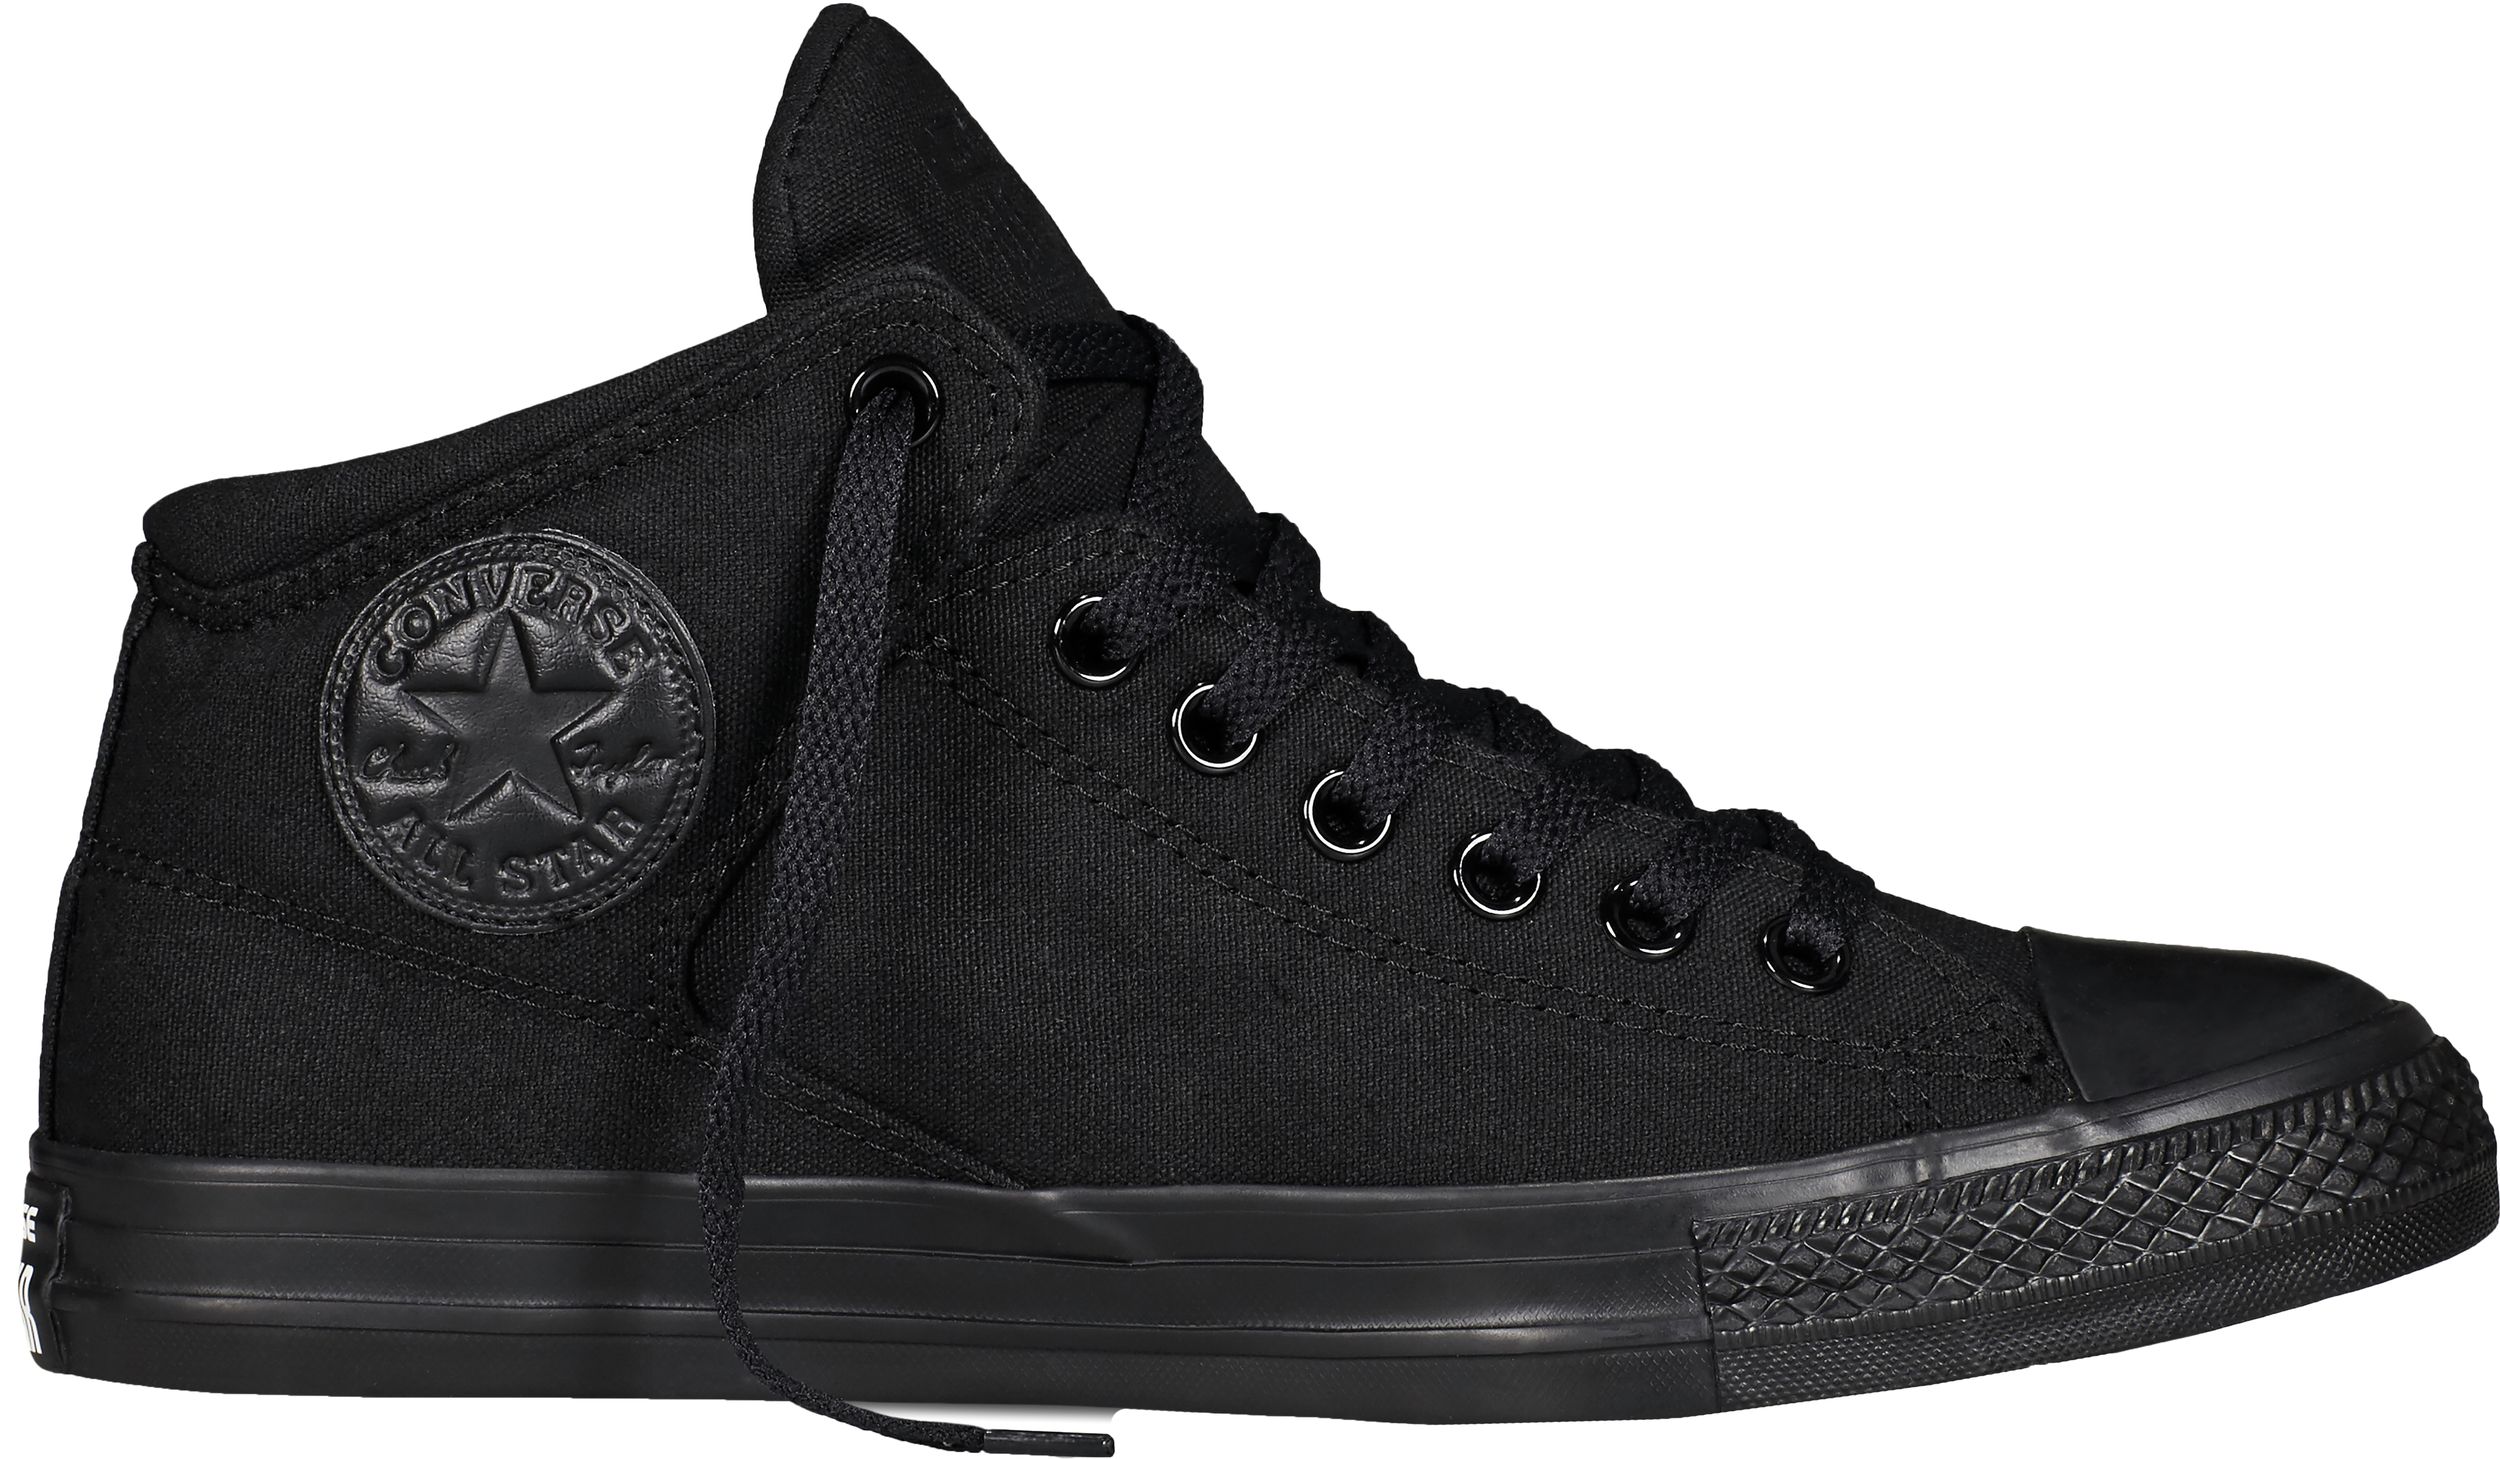 Converse Men's Chuck Taylor All Star High Street Shoes  Sneakers Canvas